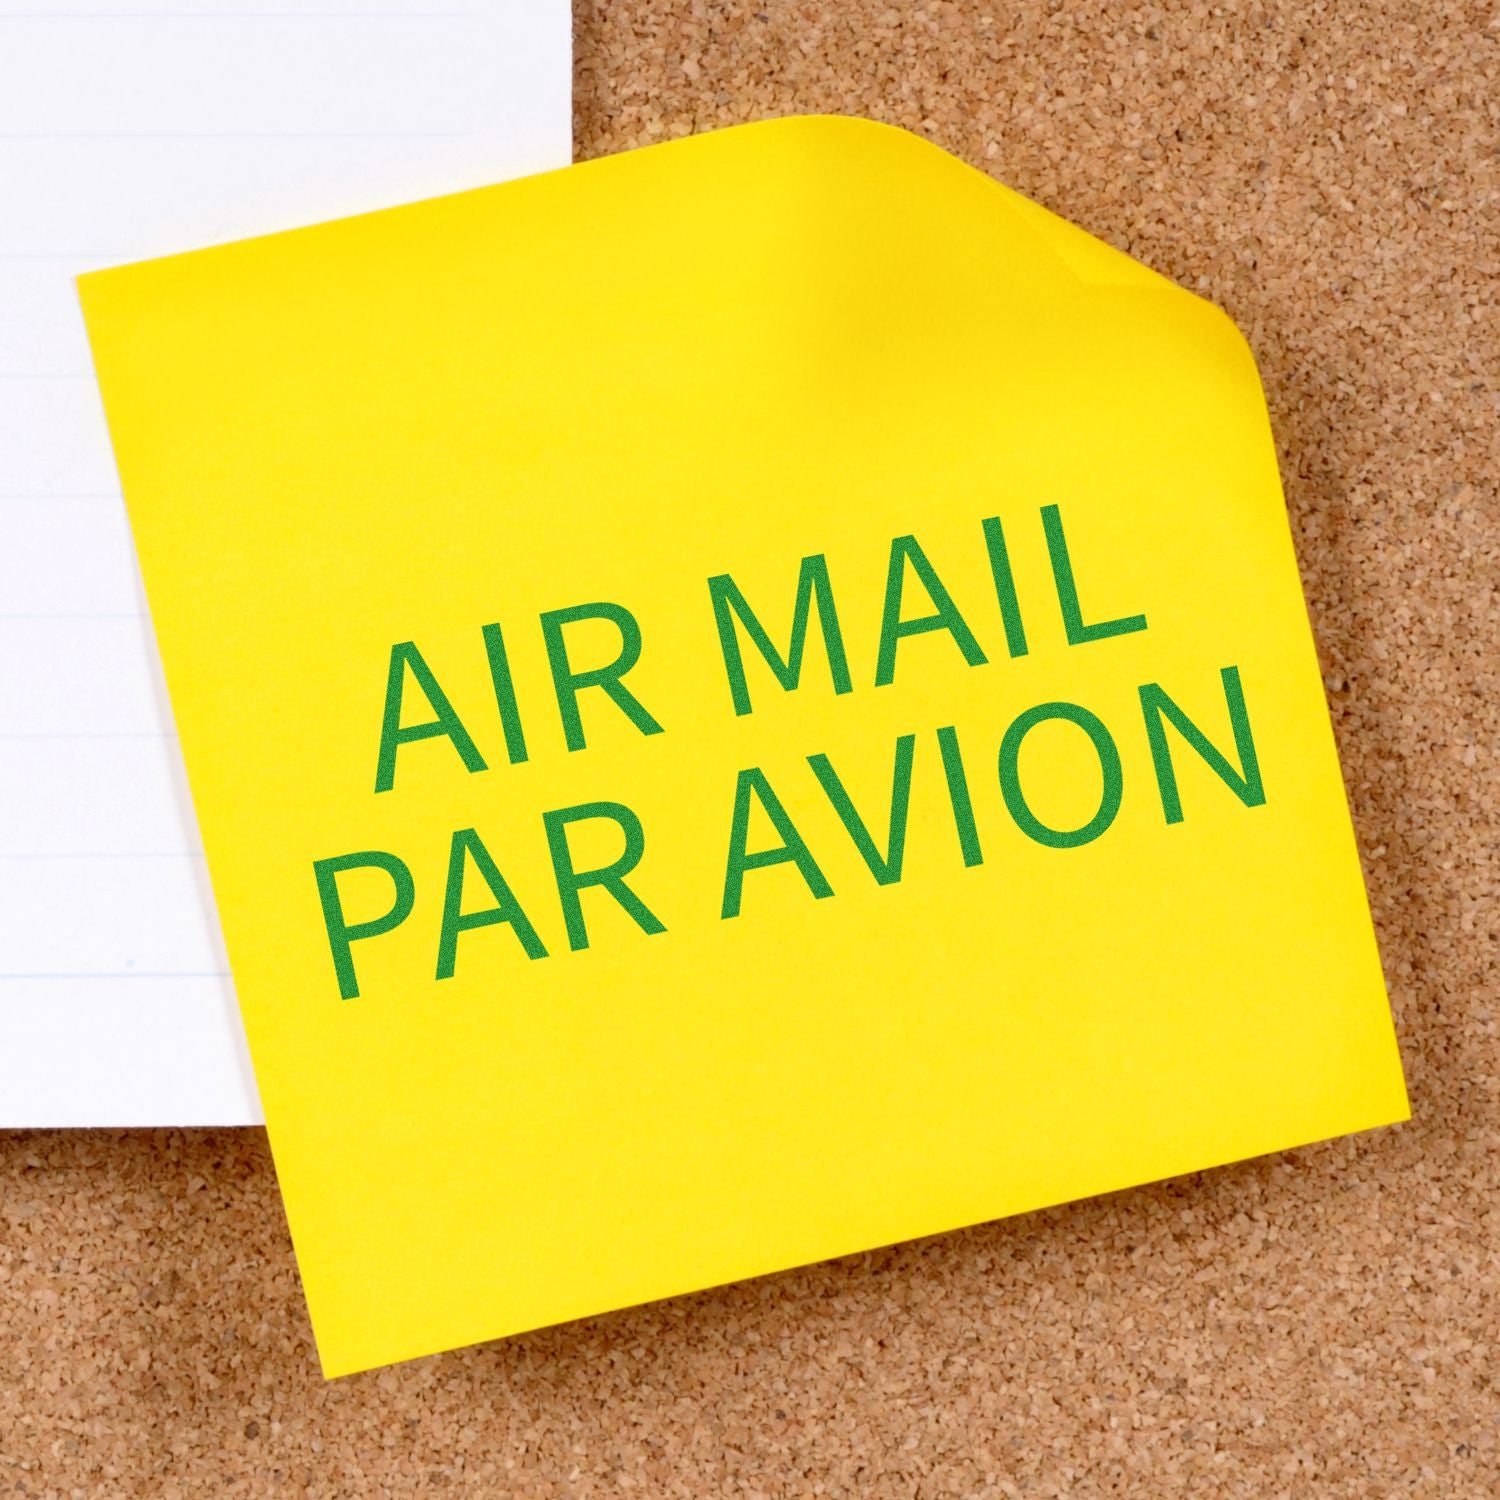 Large Self-Inking Air Mail Par Avion Stamp In Use